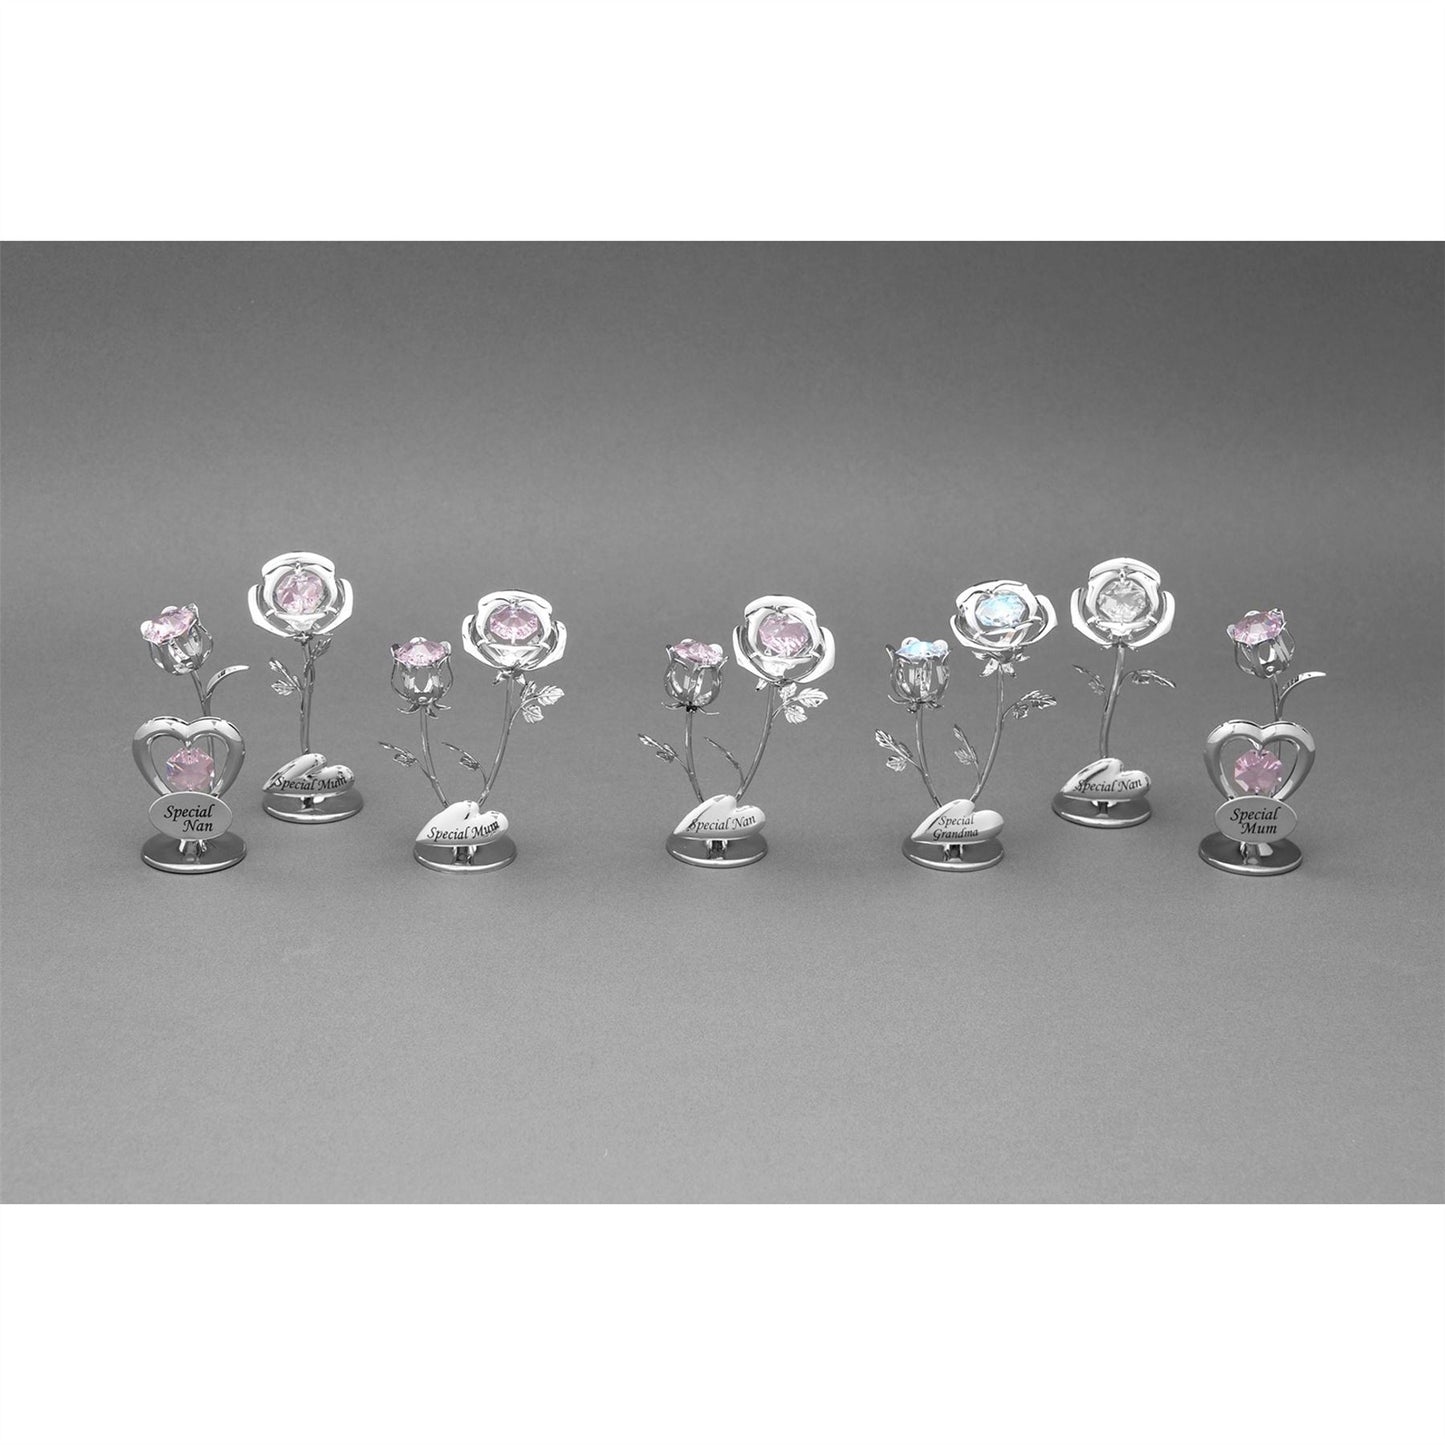 Crystocraft Chrome Plated Rose & Rose Bud - Special Nan